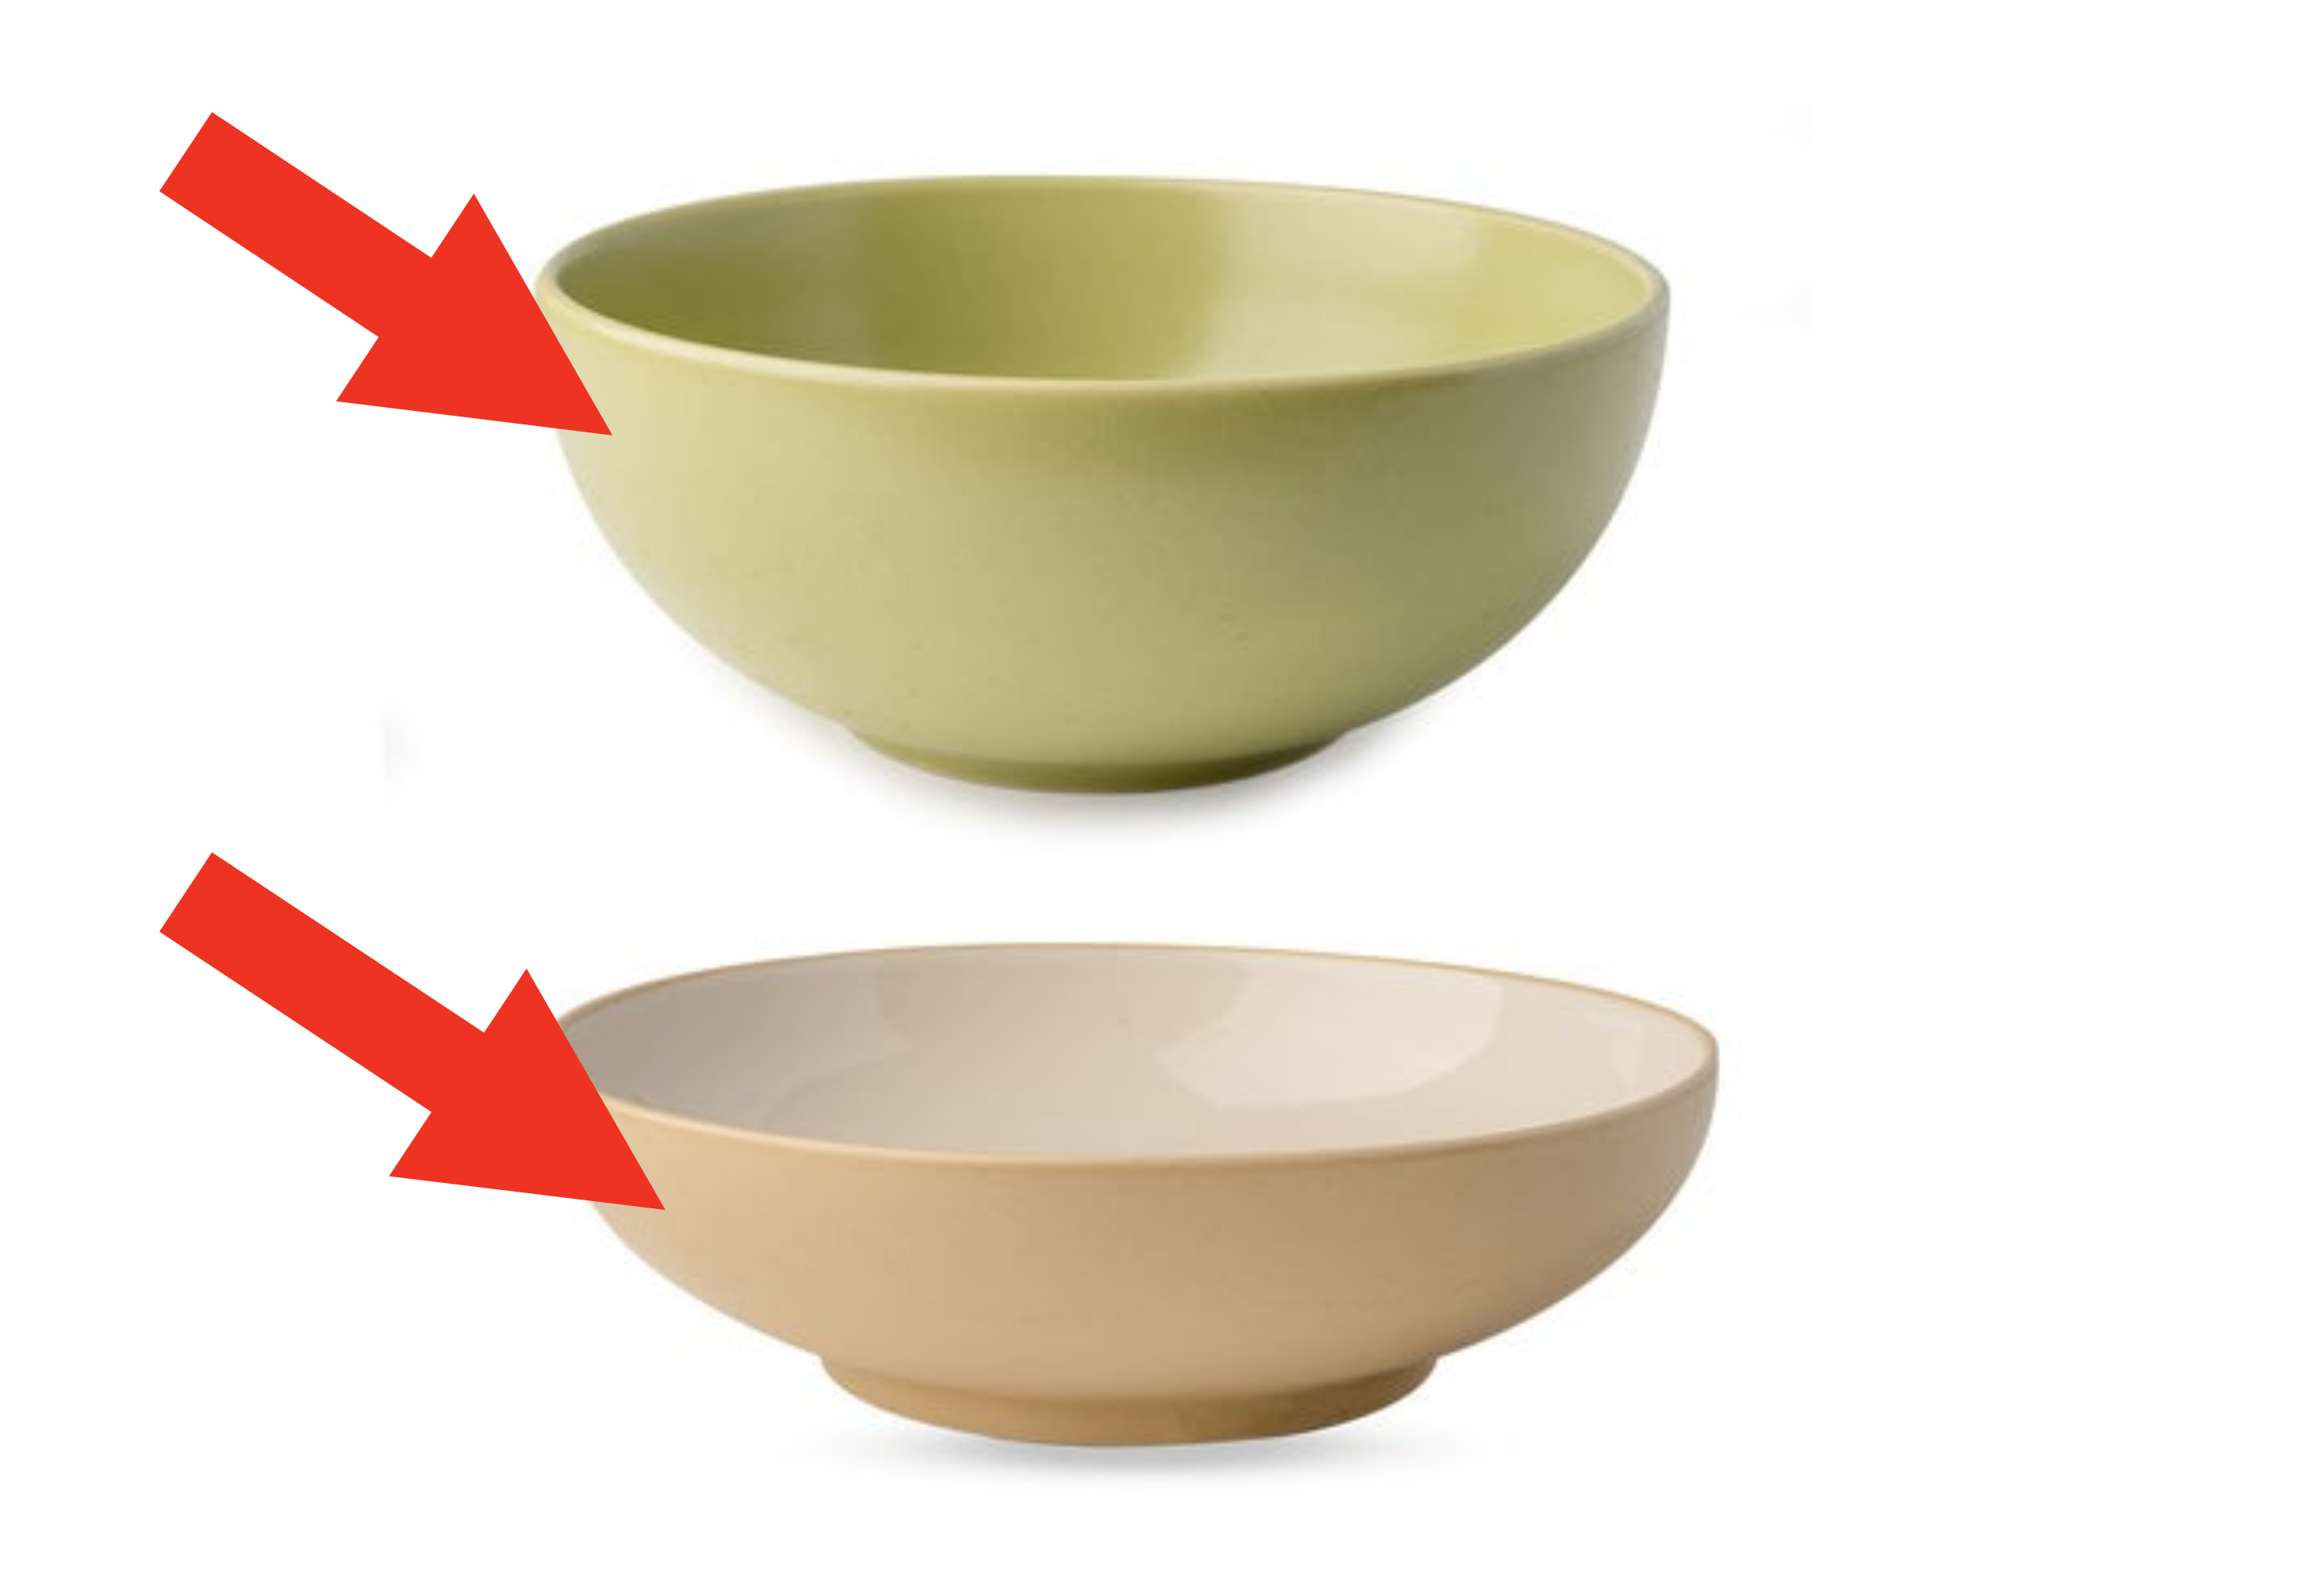 Two simple ceramic bowls without any distinctive patterns or textures